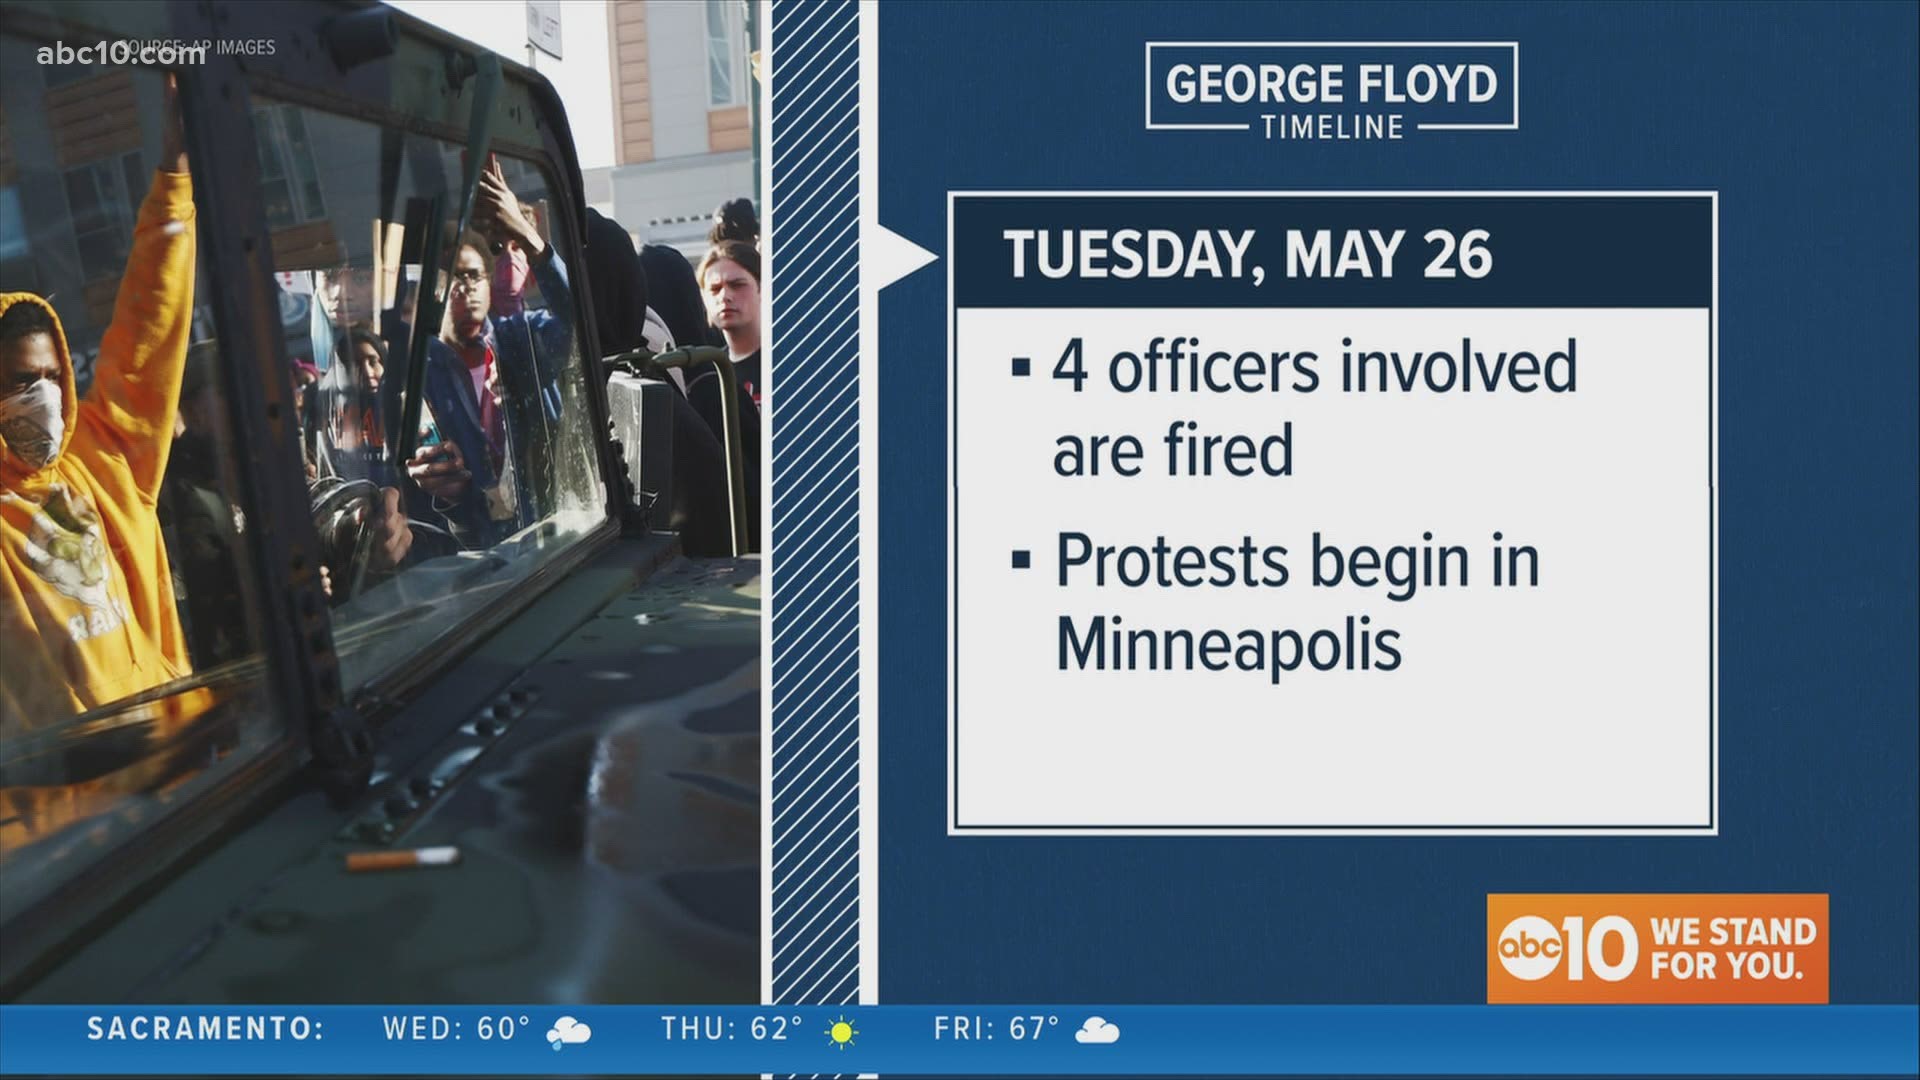 A timeline breaks down what has happened across the country since the death of George Floyd.